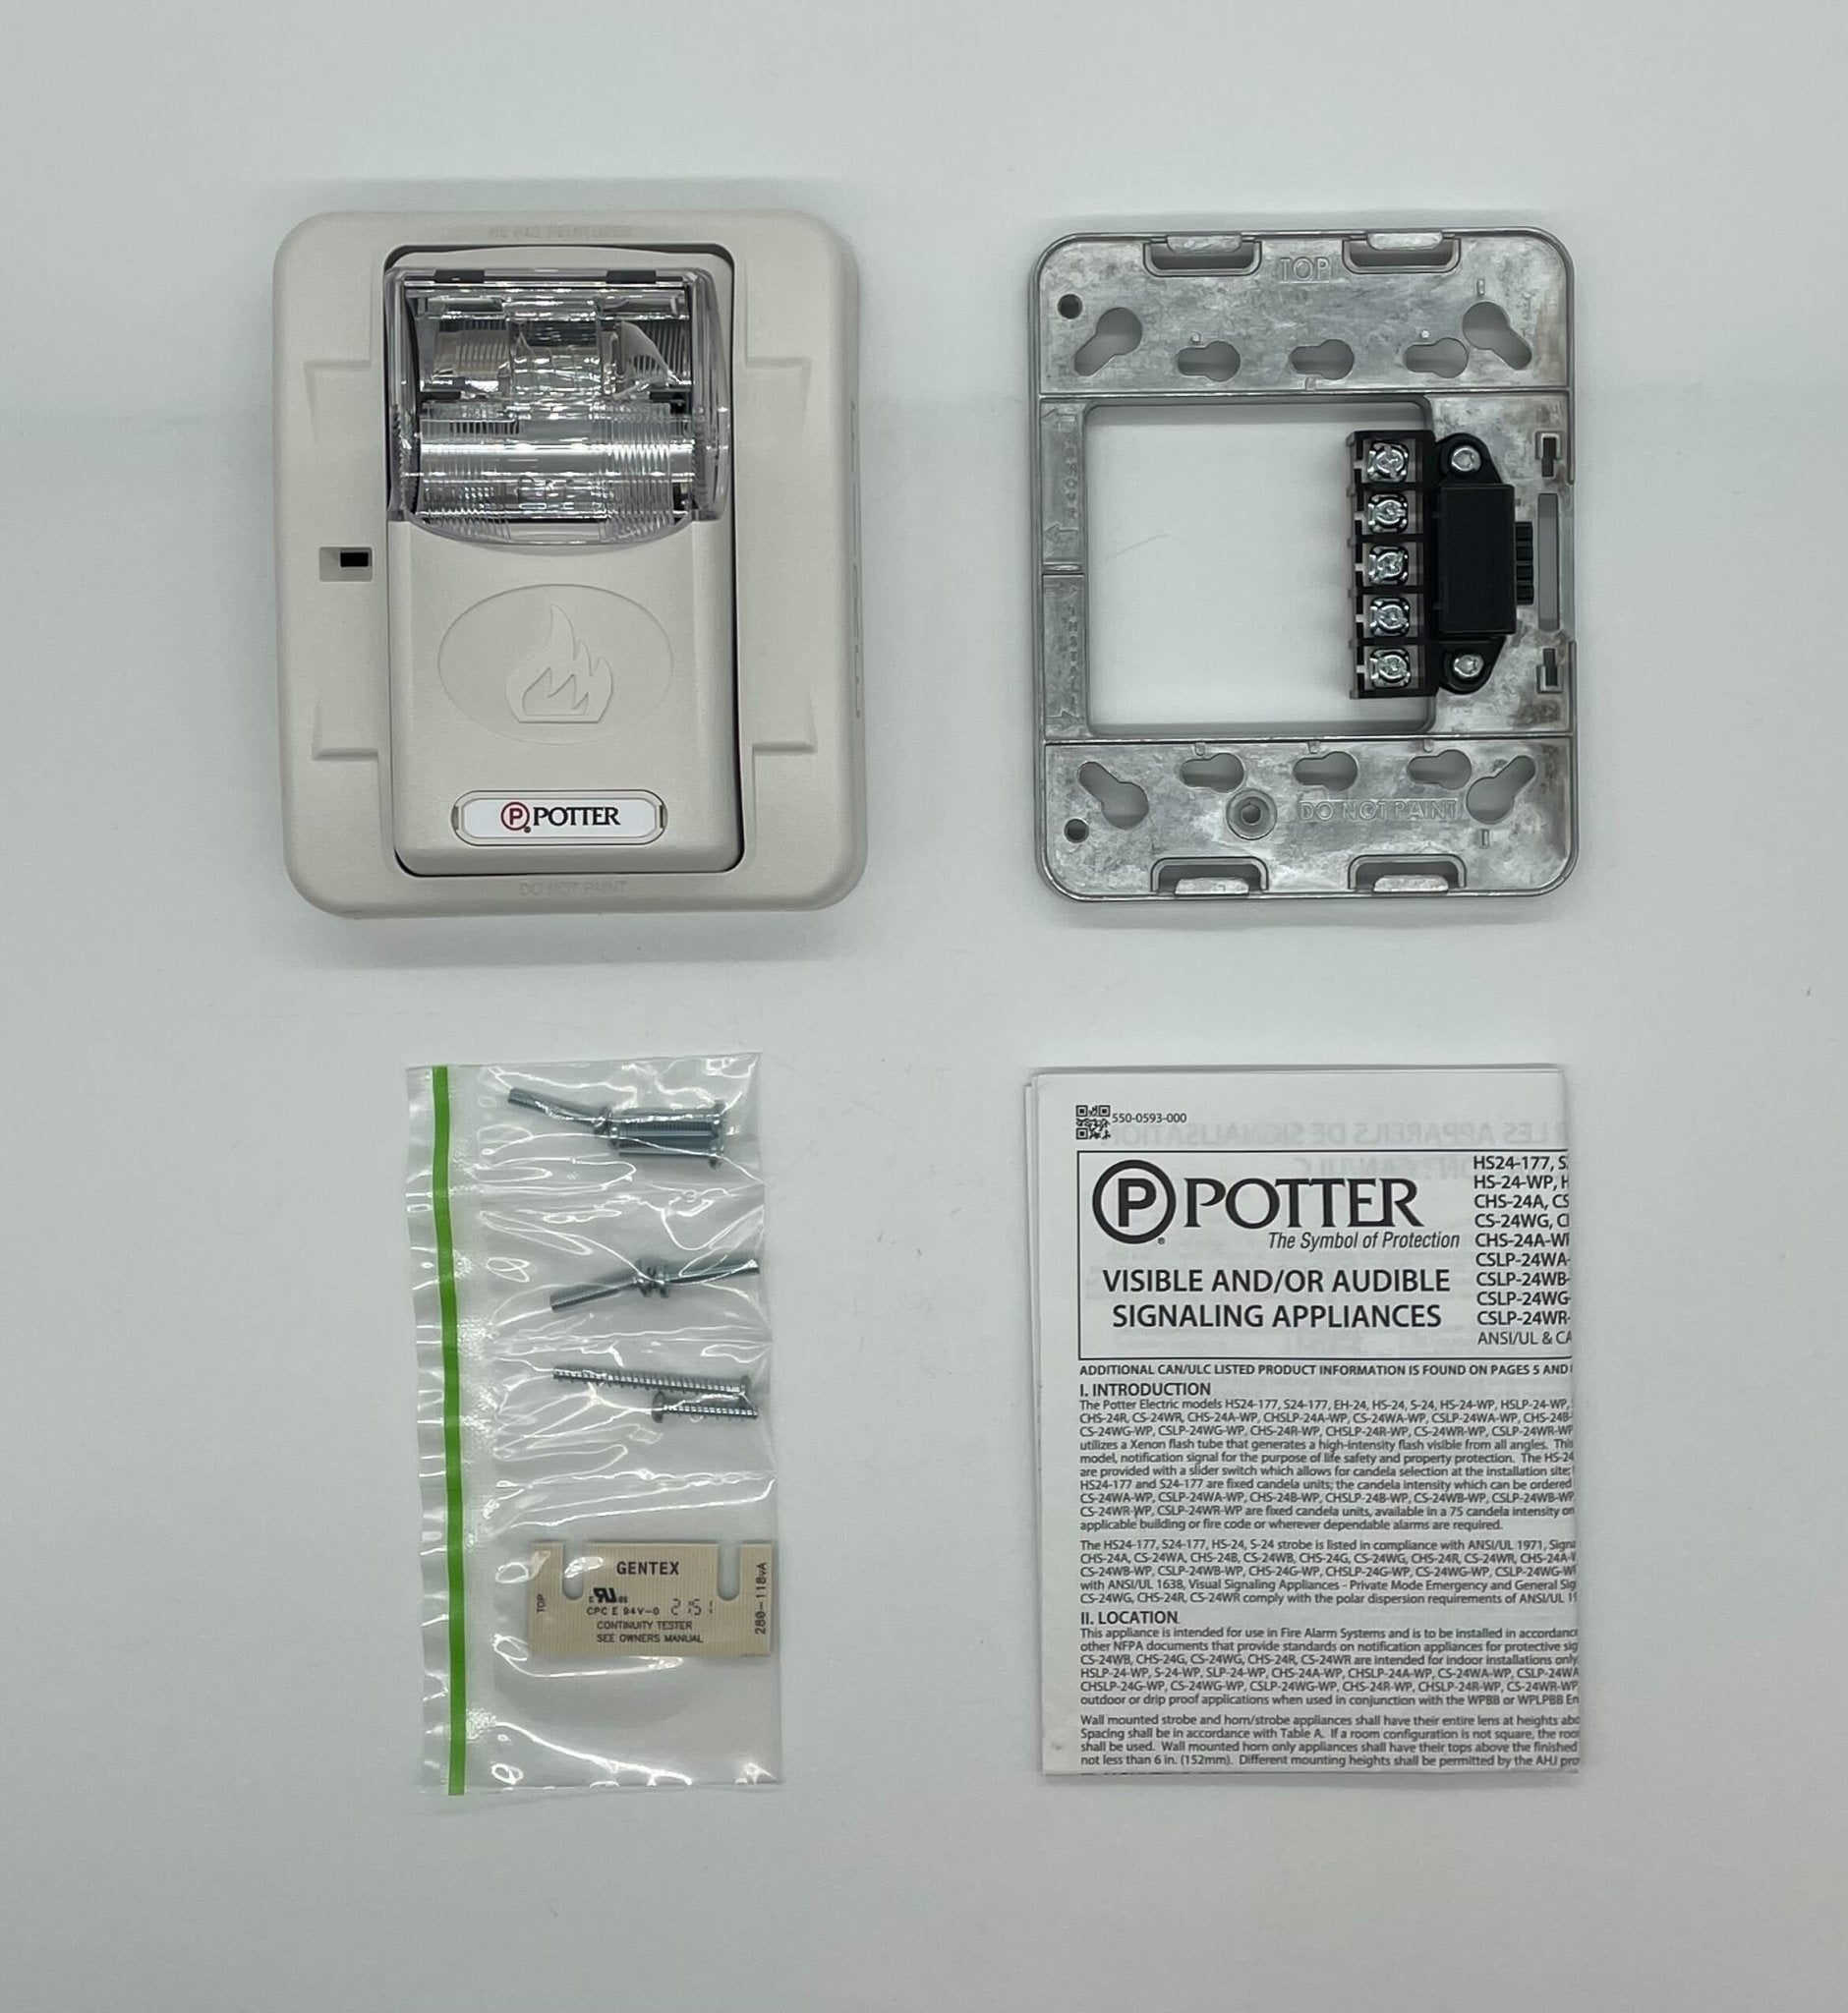 Potter S-24WW - The Fire Alarm Supplier